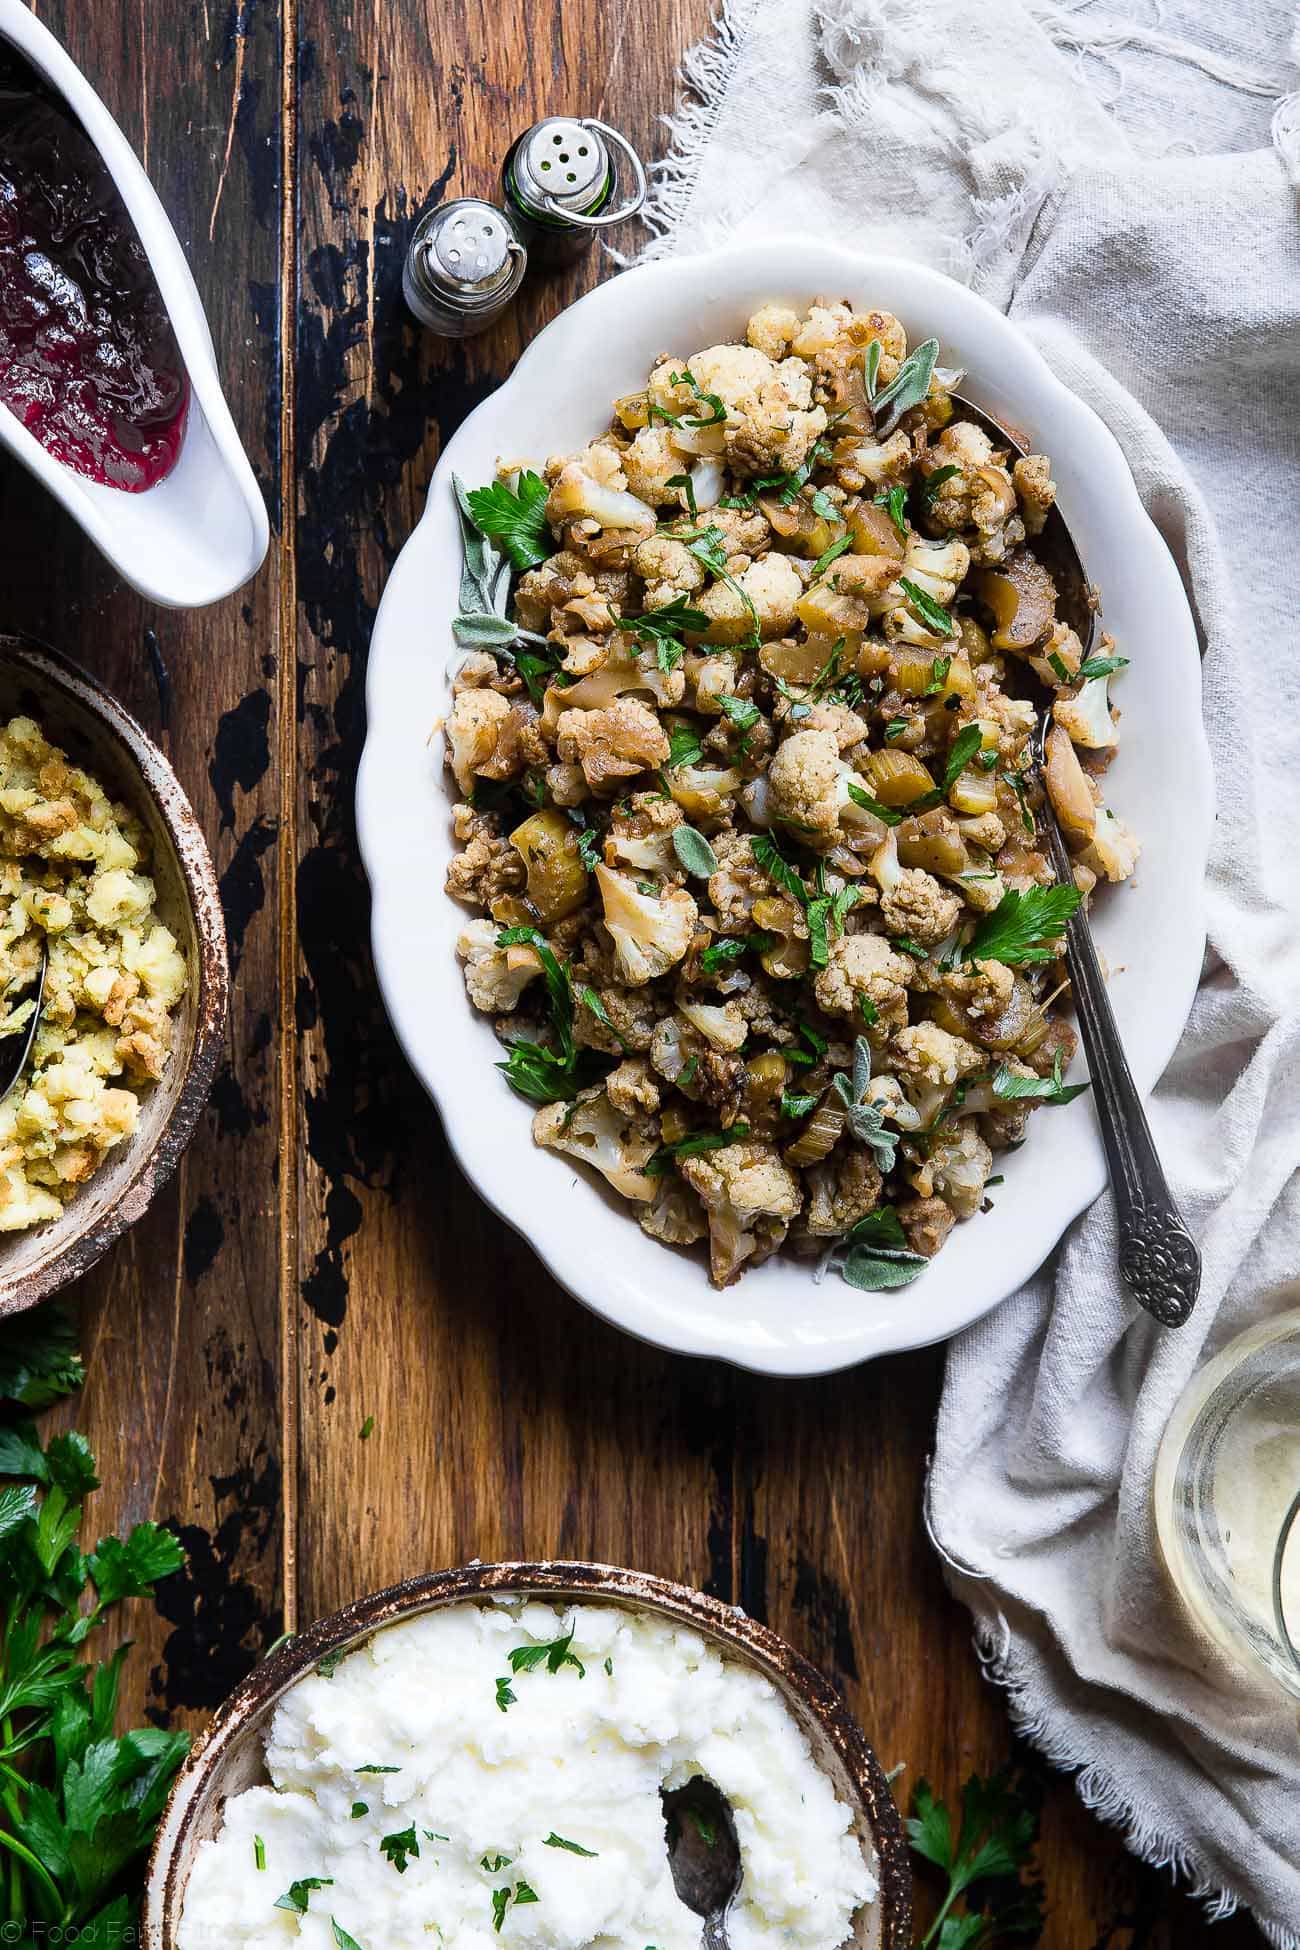 Cauliflower Low Carb Paleo Vegan Stuffing - Made entirely from vegetables but has all the flavor of traditional bread stuffing! It's super easy, whole30 compliant, paleo, vegan, gluten free and SO delicious! Perfect for Thanksgiving or Christmas! | Foodfaithfitness.com | @FoodFaithFit